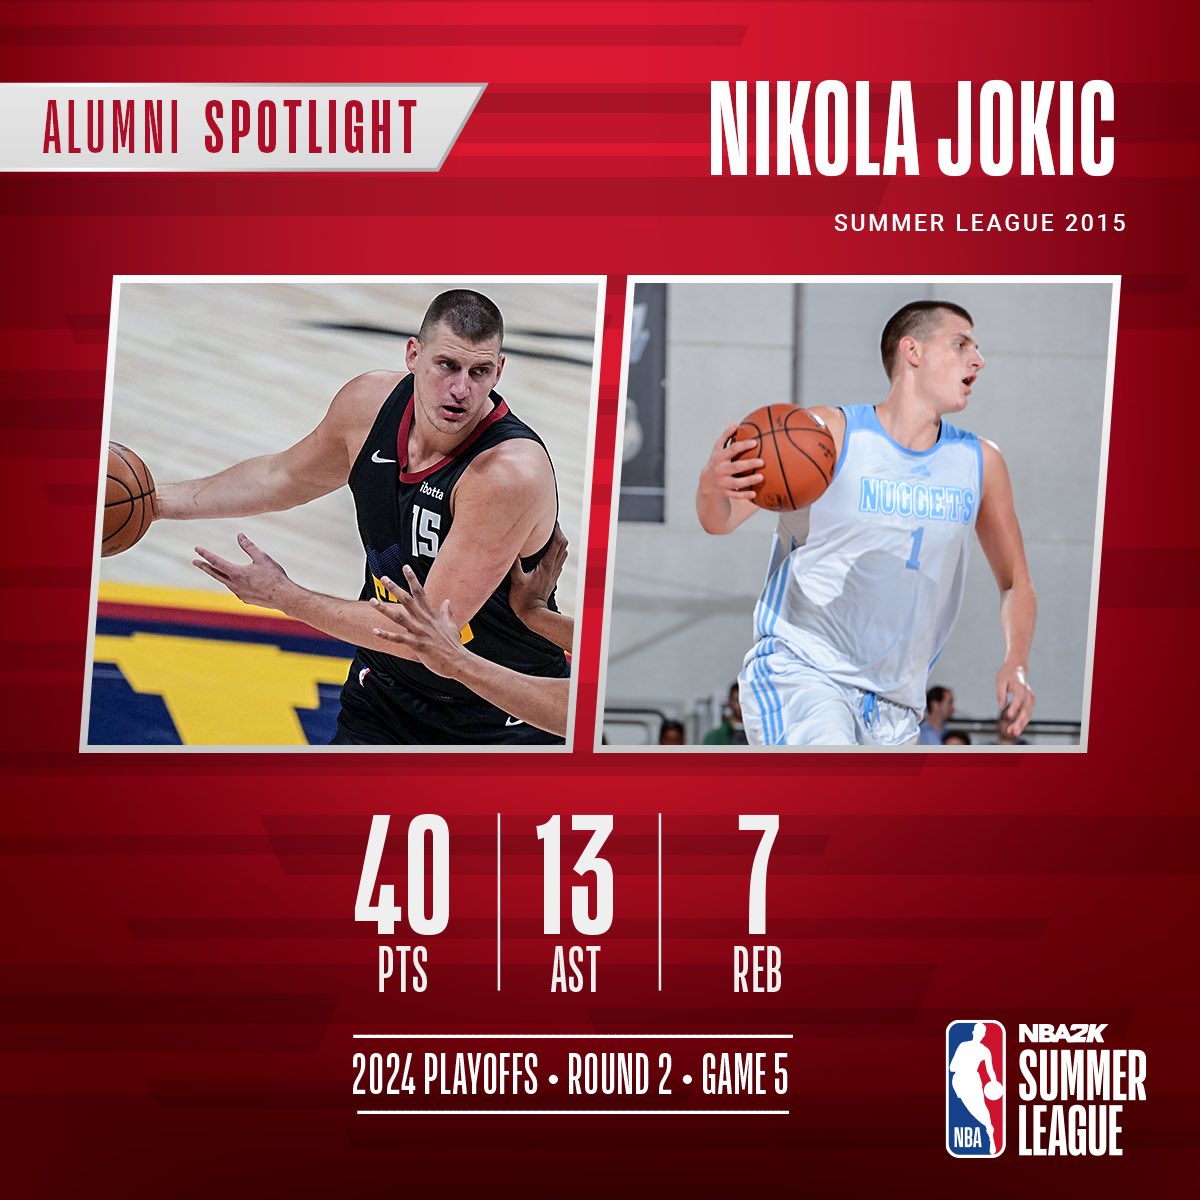 💥 Jokic led the Denver Nuggets past the Minnesota Timberwolves with a  112-97 win that put the reigning NBA champs one win away from the Western Conference finals.

🎟️ Tickets are NOW ON SALE for the #NBA2KSummerLeague! 

Find out more here: NBAEvents.com